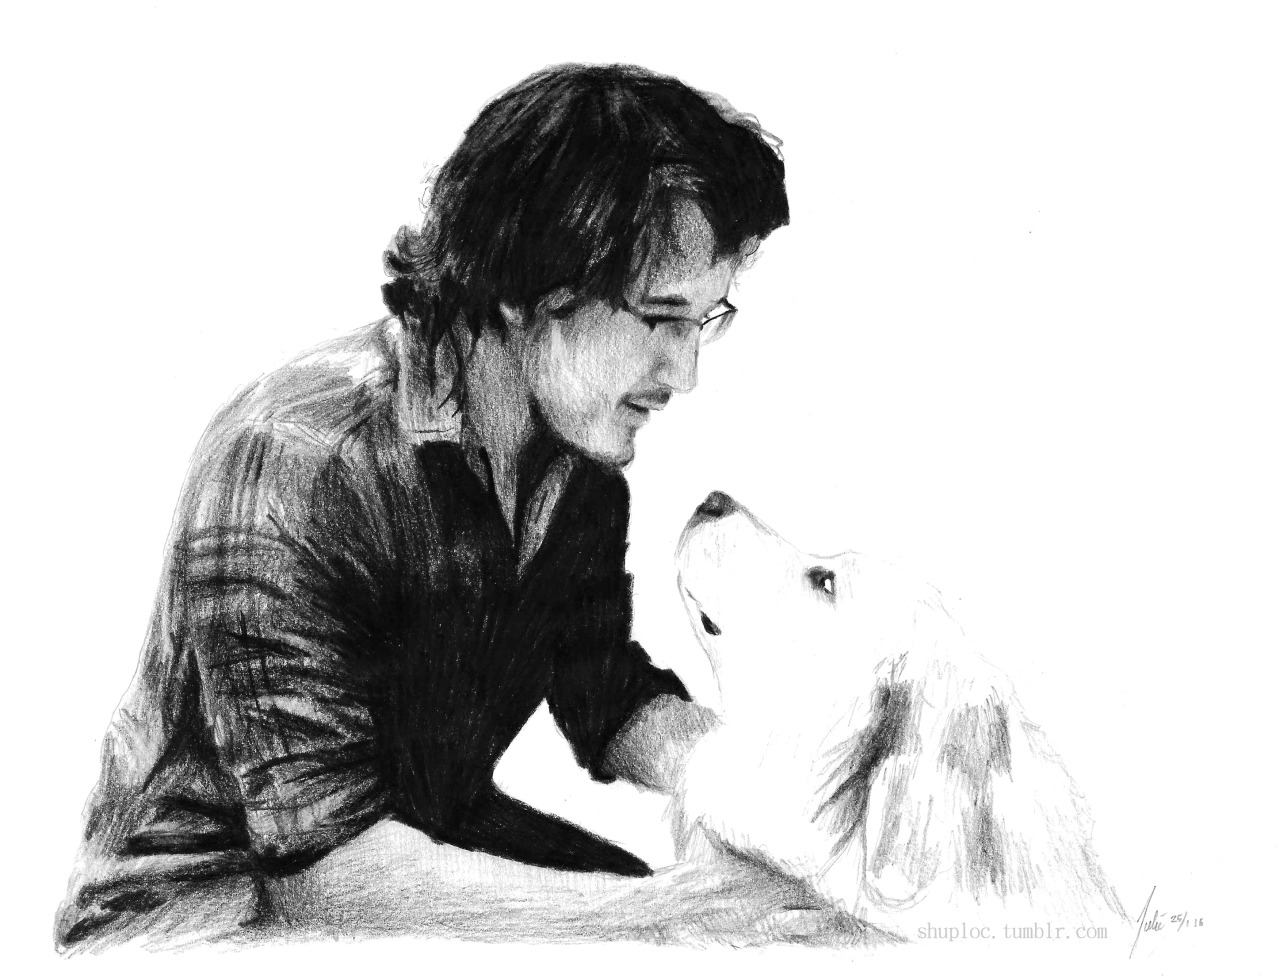 shuploc:  A Man and His Dog (Markiplier and Lucy)    Black colored pencil - 6 hours